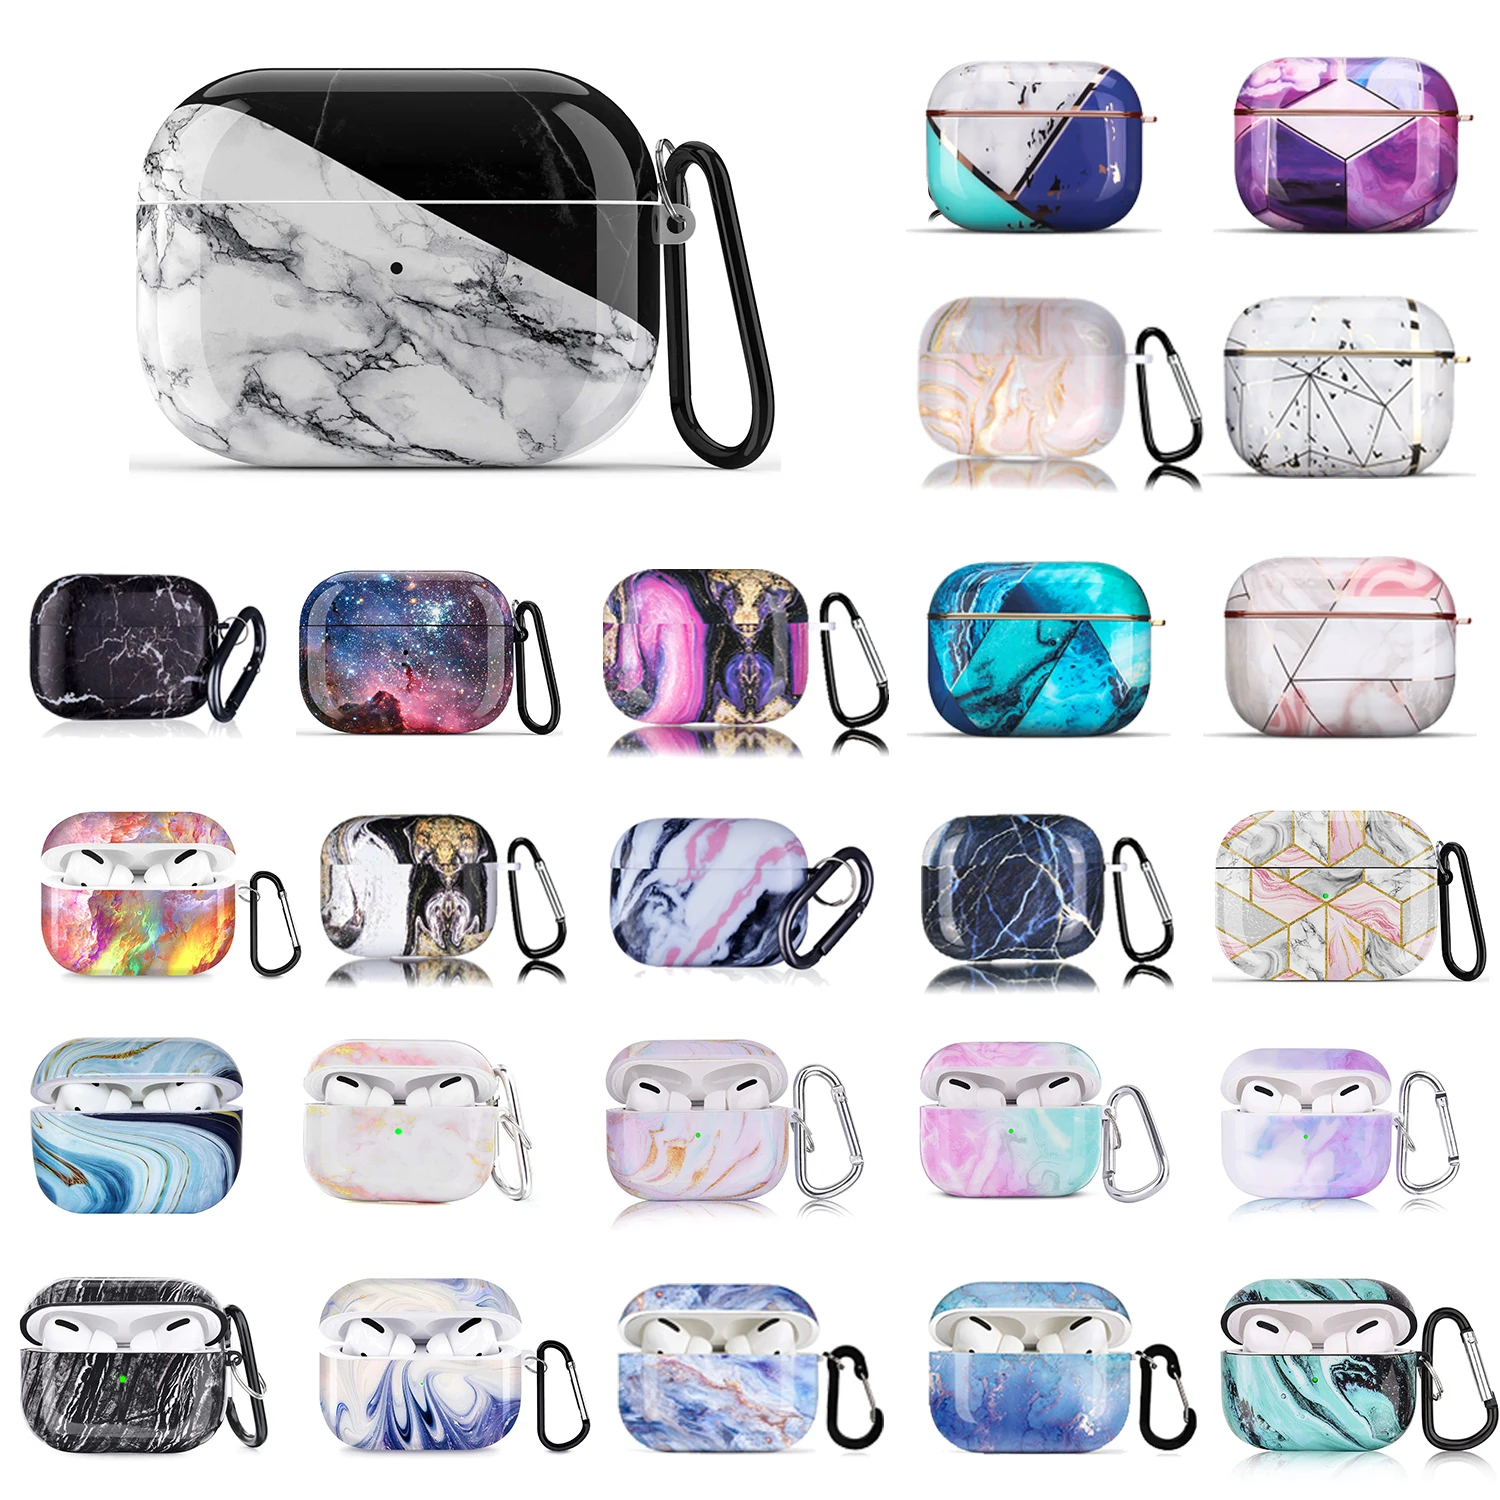 

Low MOQ Earphone Accessories Case For Apple Wholesale Marble Airpod Cases For Airpod Pro/3, Multiple colors